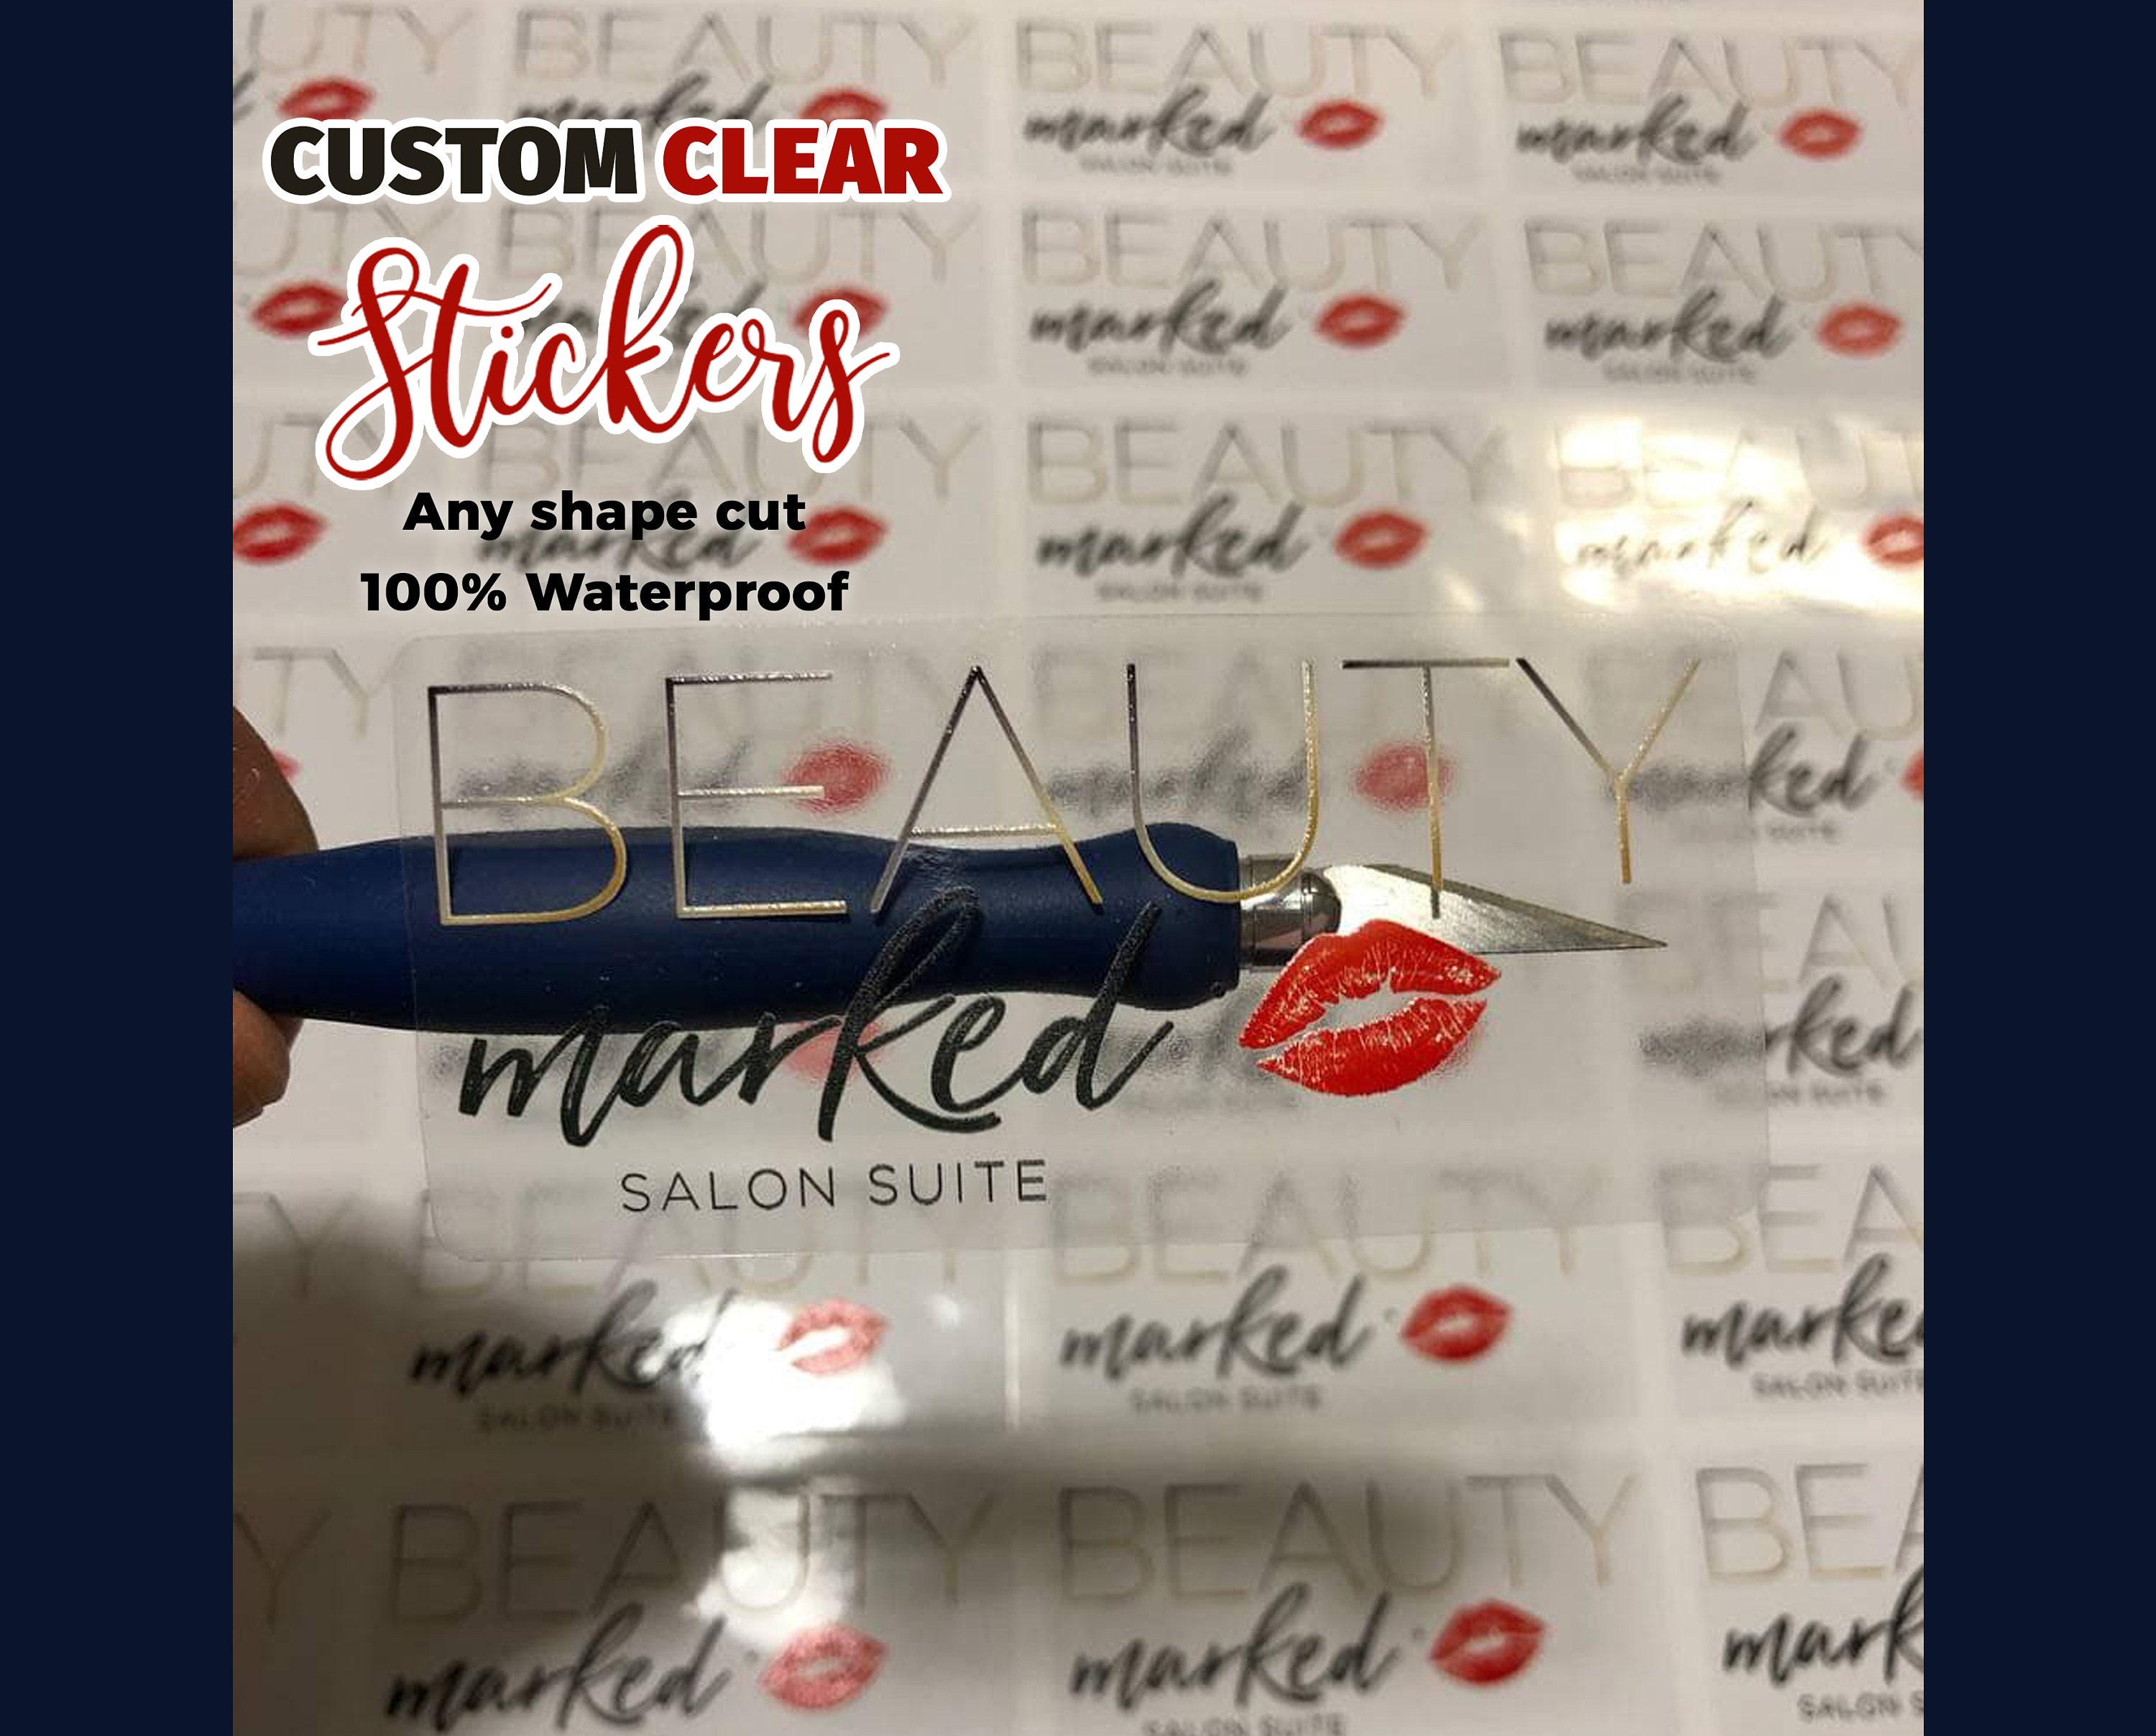 Custom Clear Stickers - Free Shipping